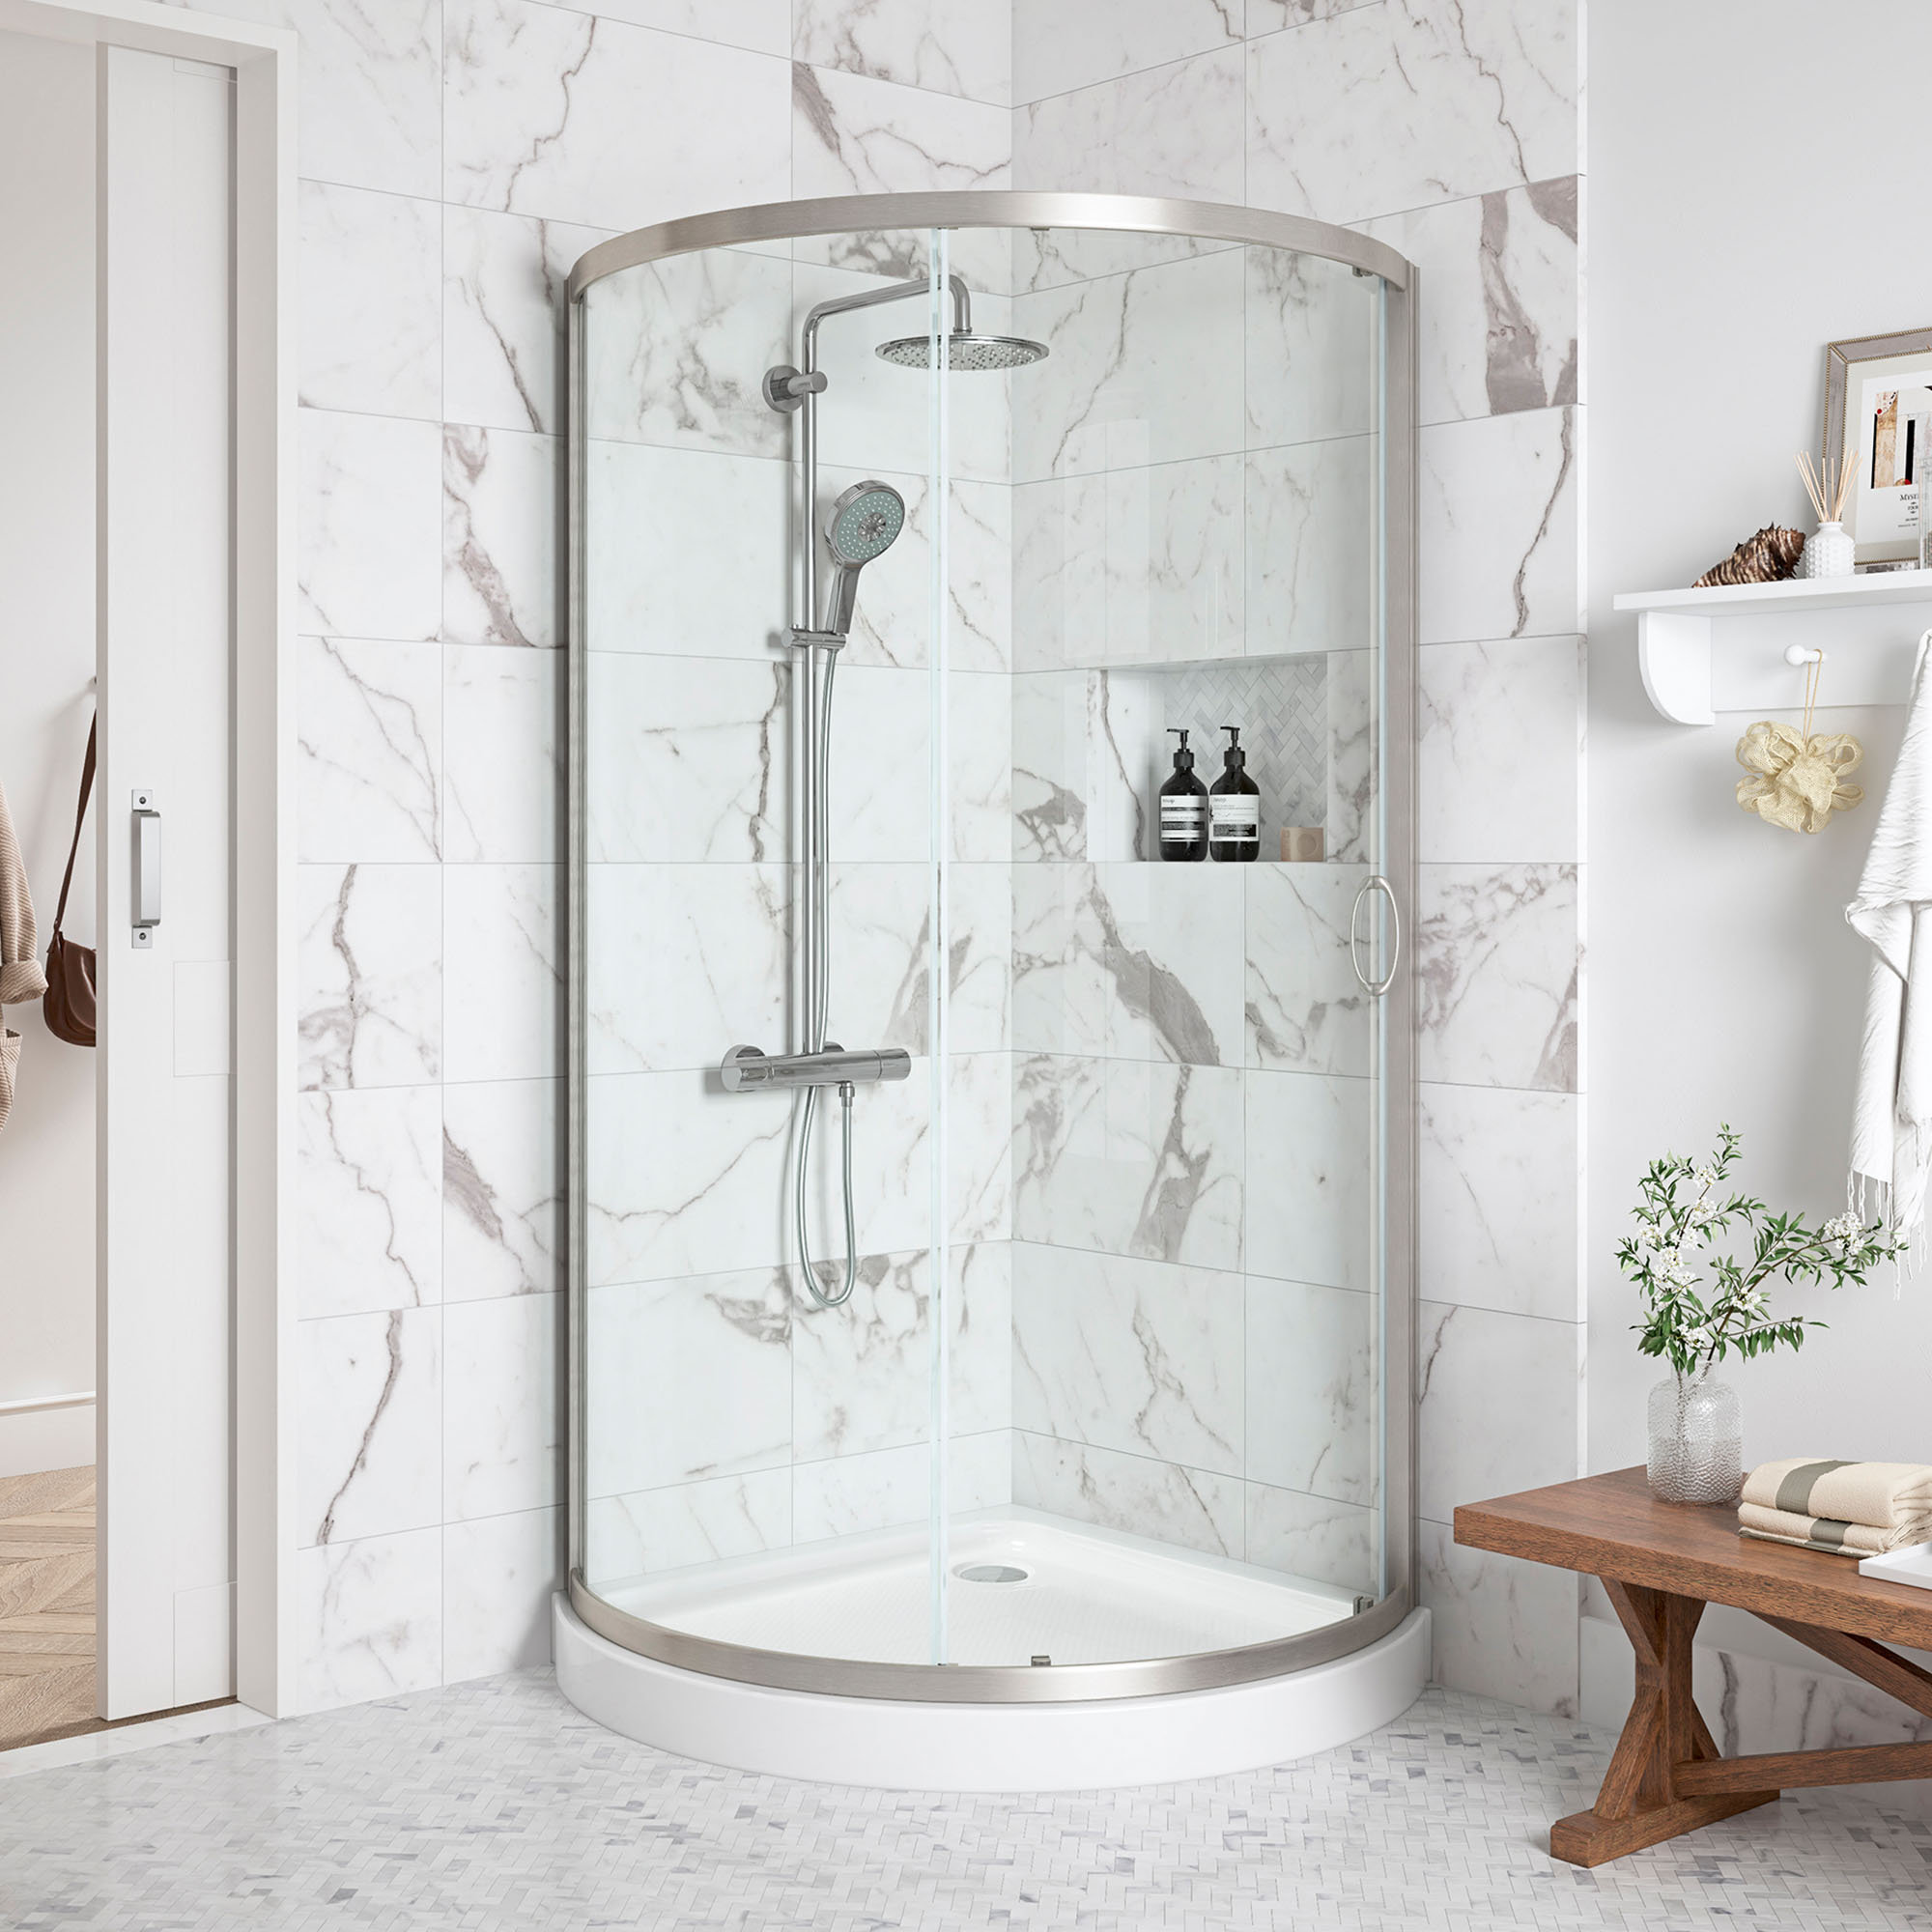 SUNNY SHOWER 36 x 36 x 72 Corner Shower Enclosure with 1/4 in. Clear  Glass Double Glass Sliding Square Shower Door, Chrome Finish, Shower Base  No